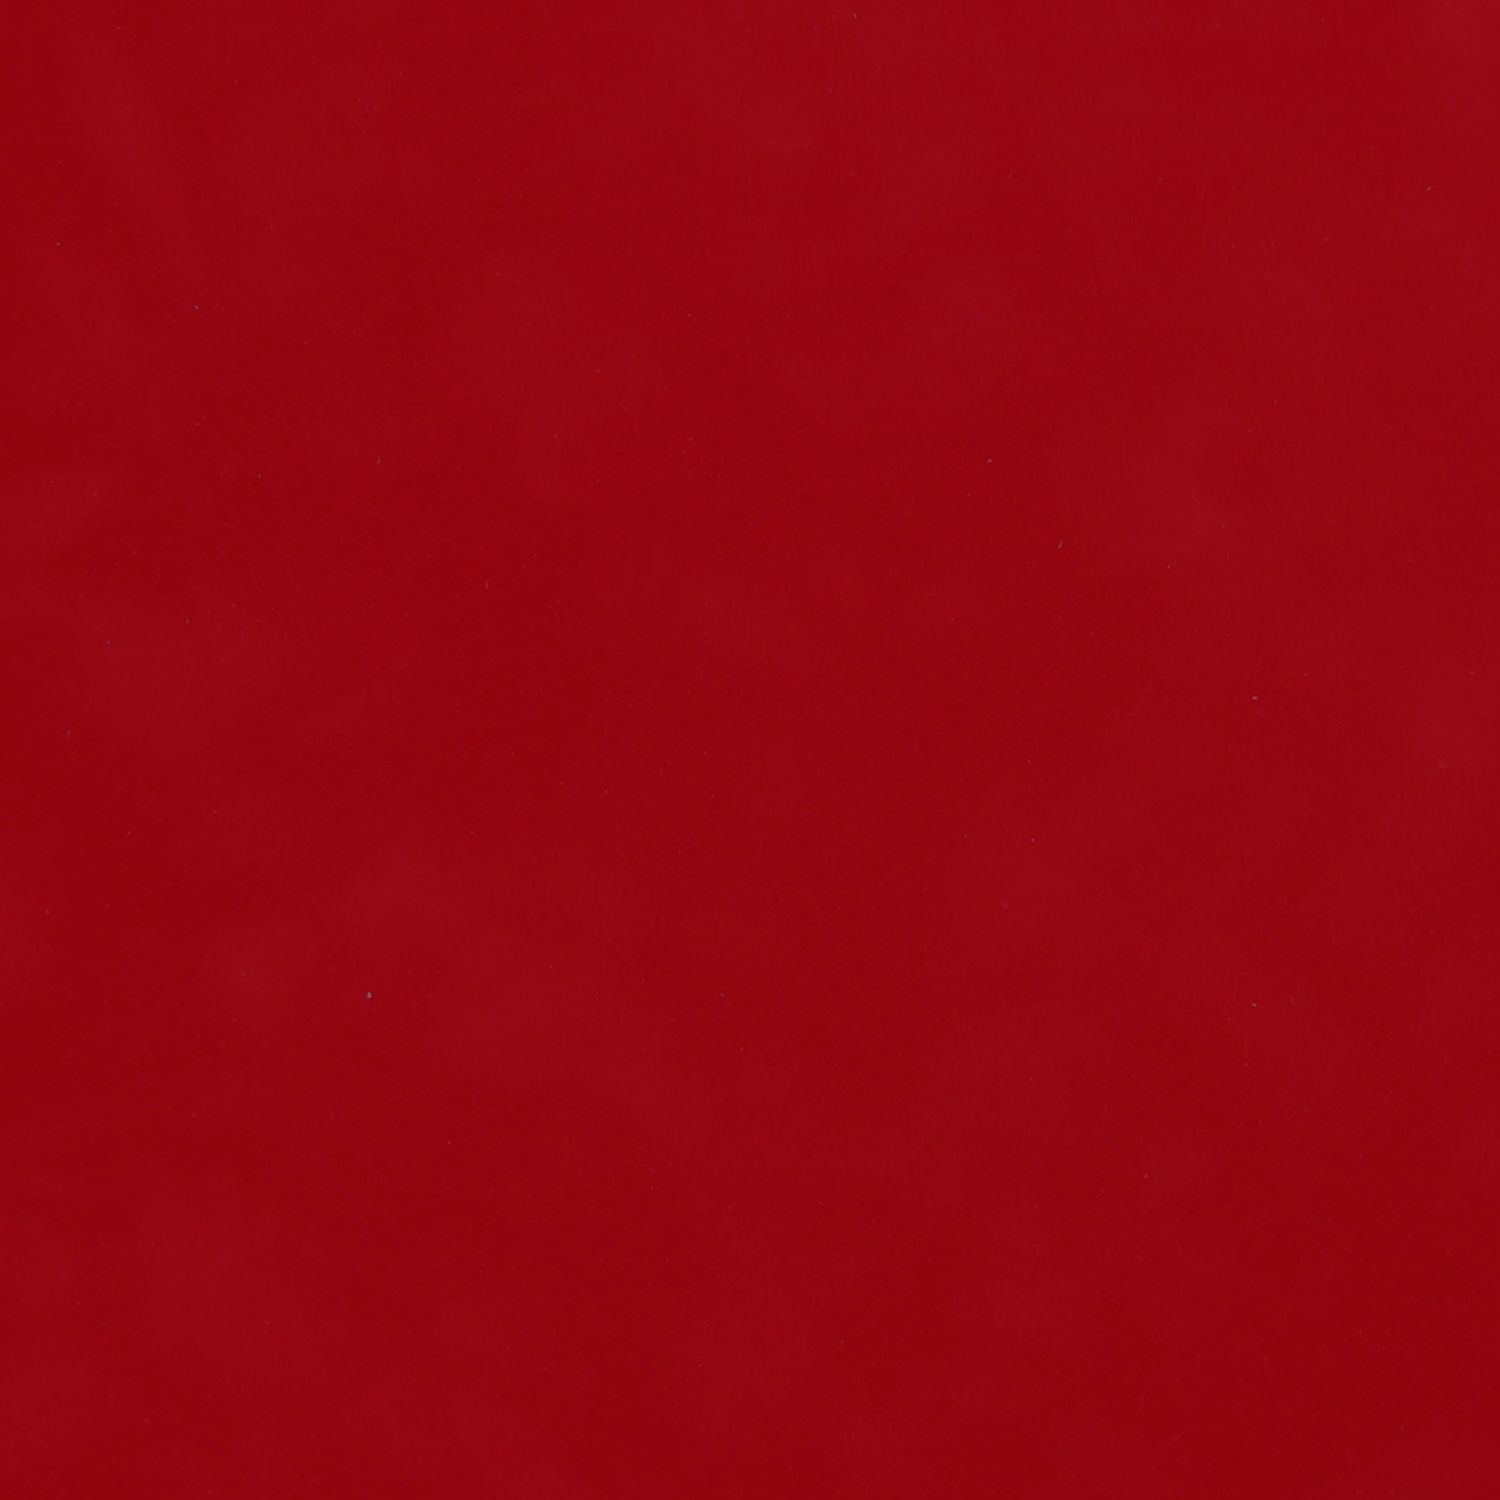 Solid Color Red Background - wallpaper